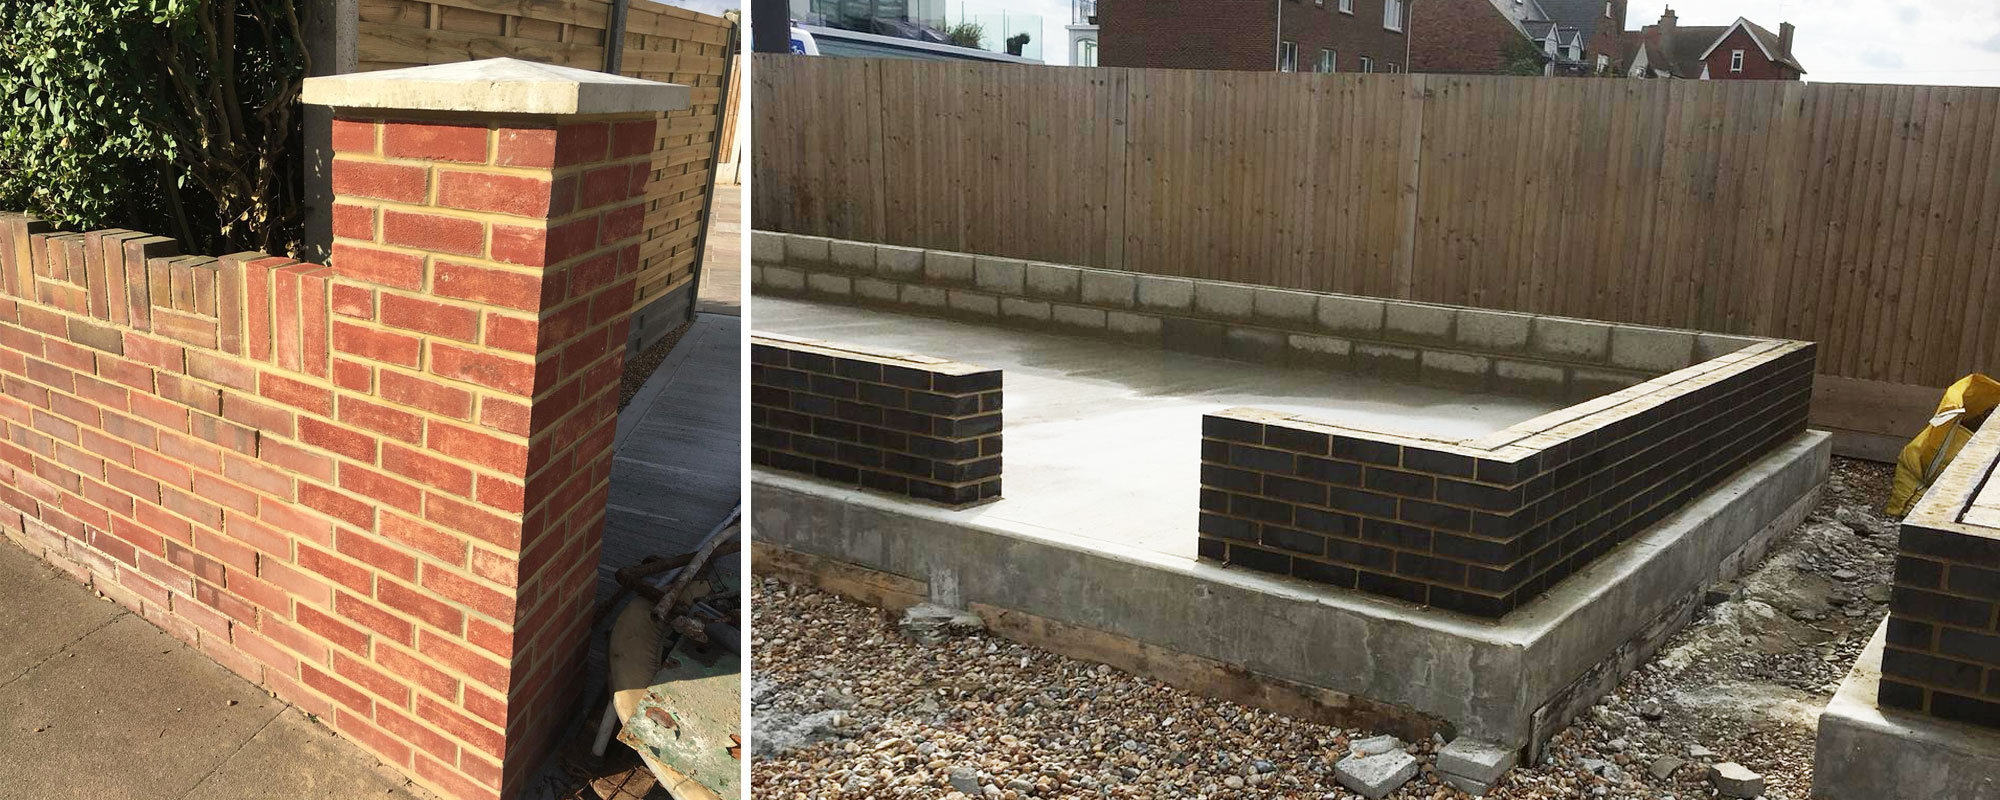 Brickwork Services - Our NVQ Qualified team are experts in laying brickwork installations